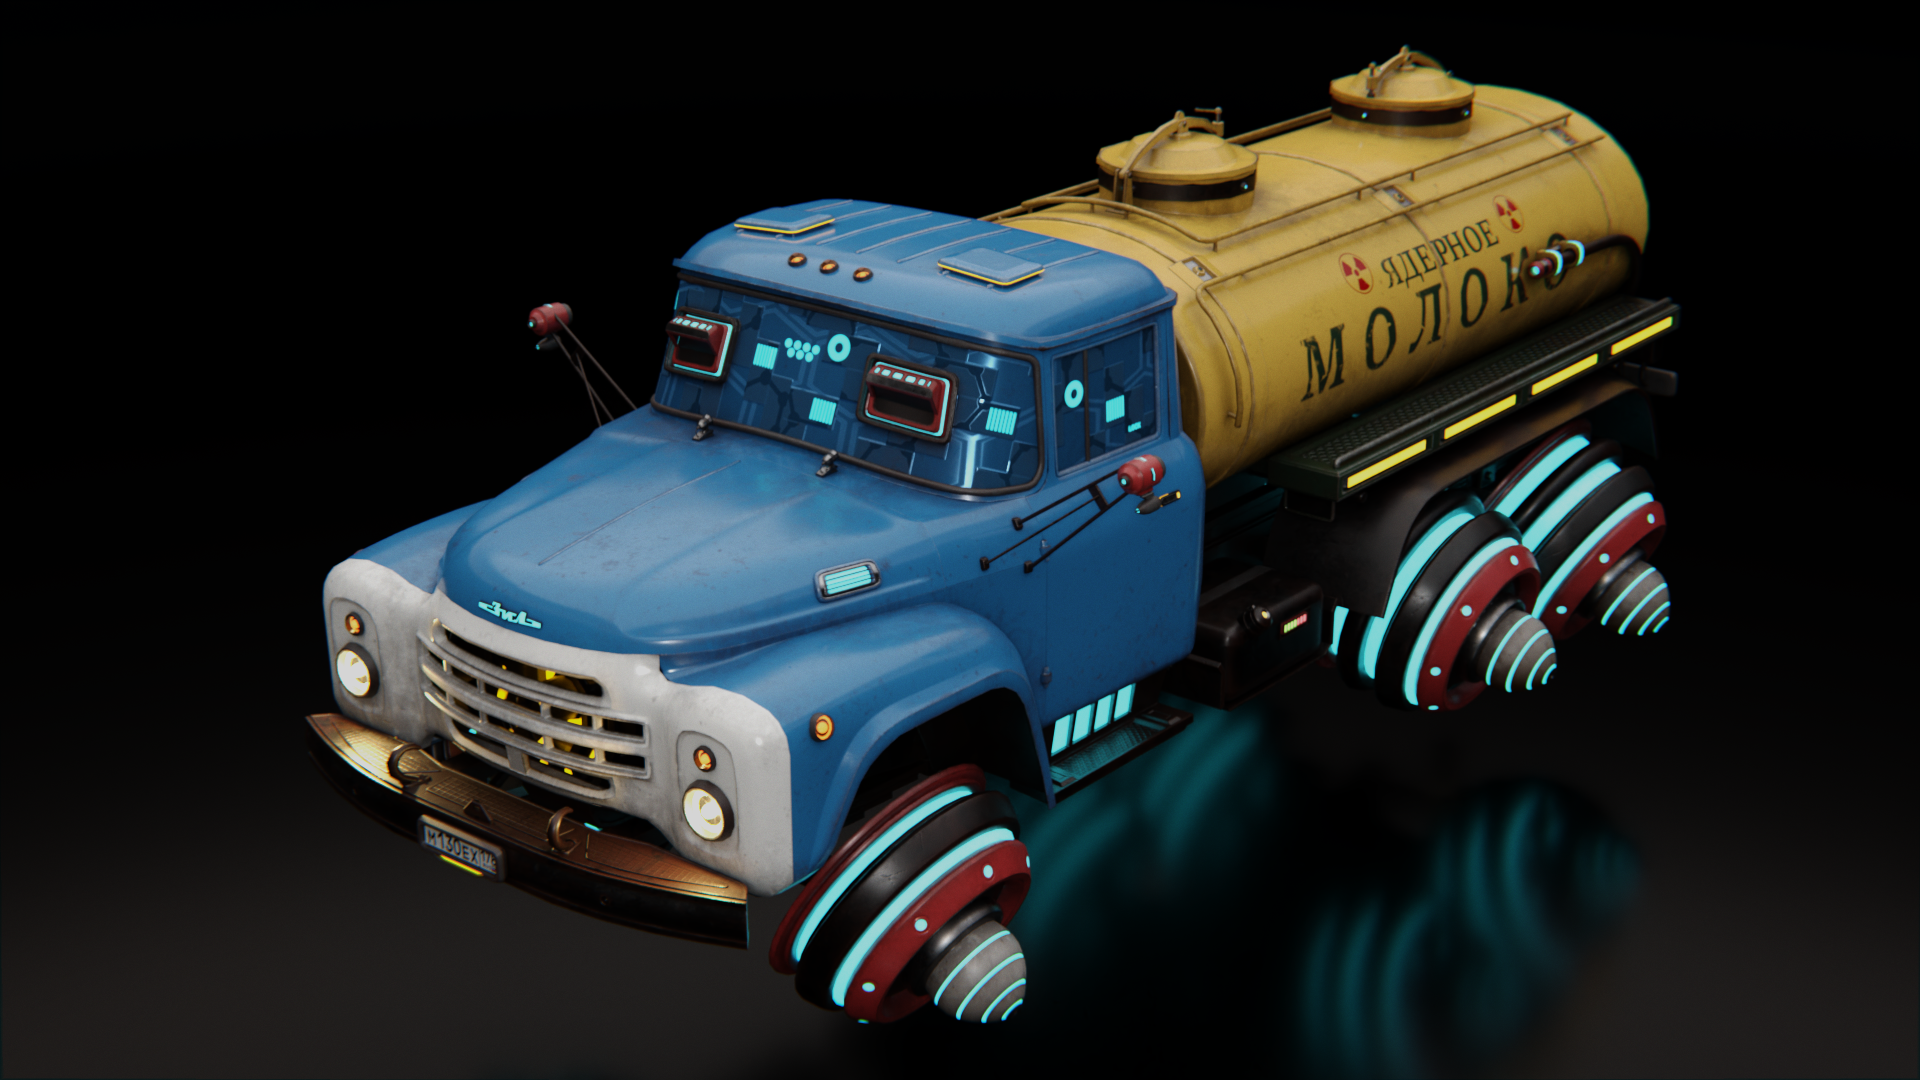 Cybertruck 2077 preview image 3